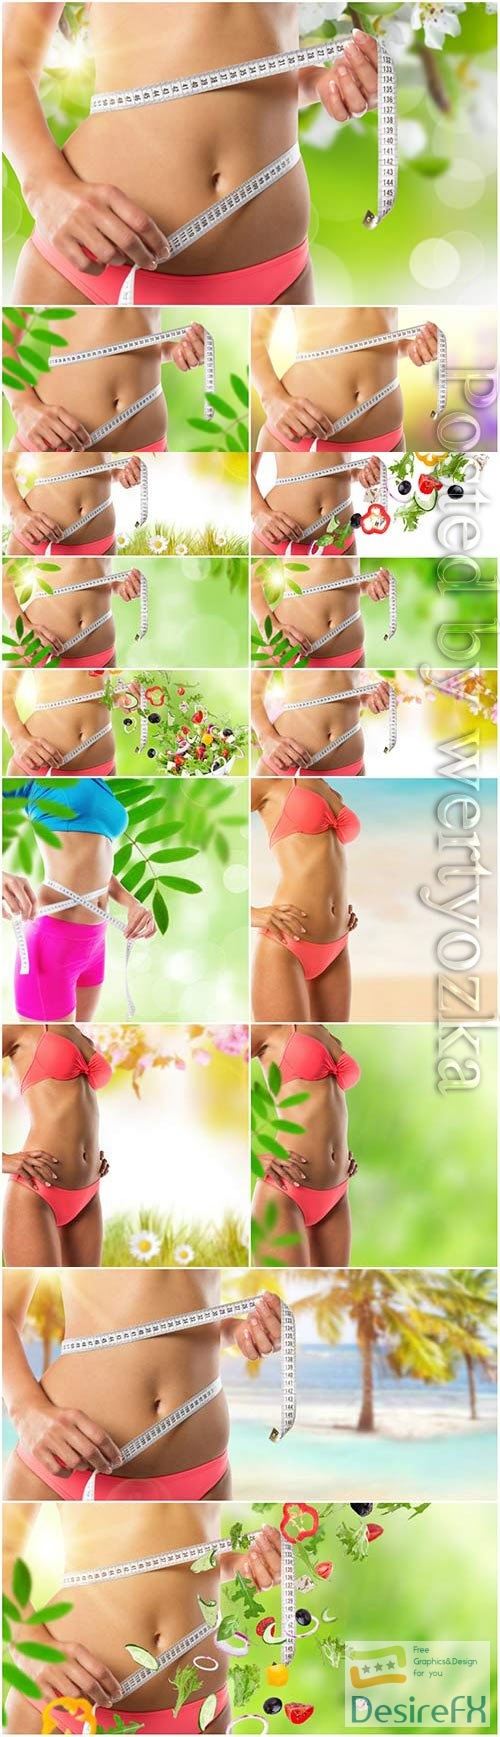 Beautiful female figure and healthy eating concept stock photo